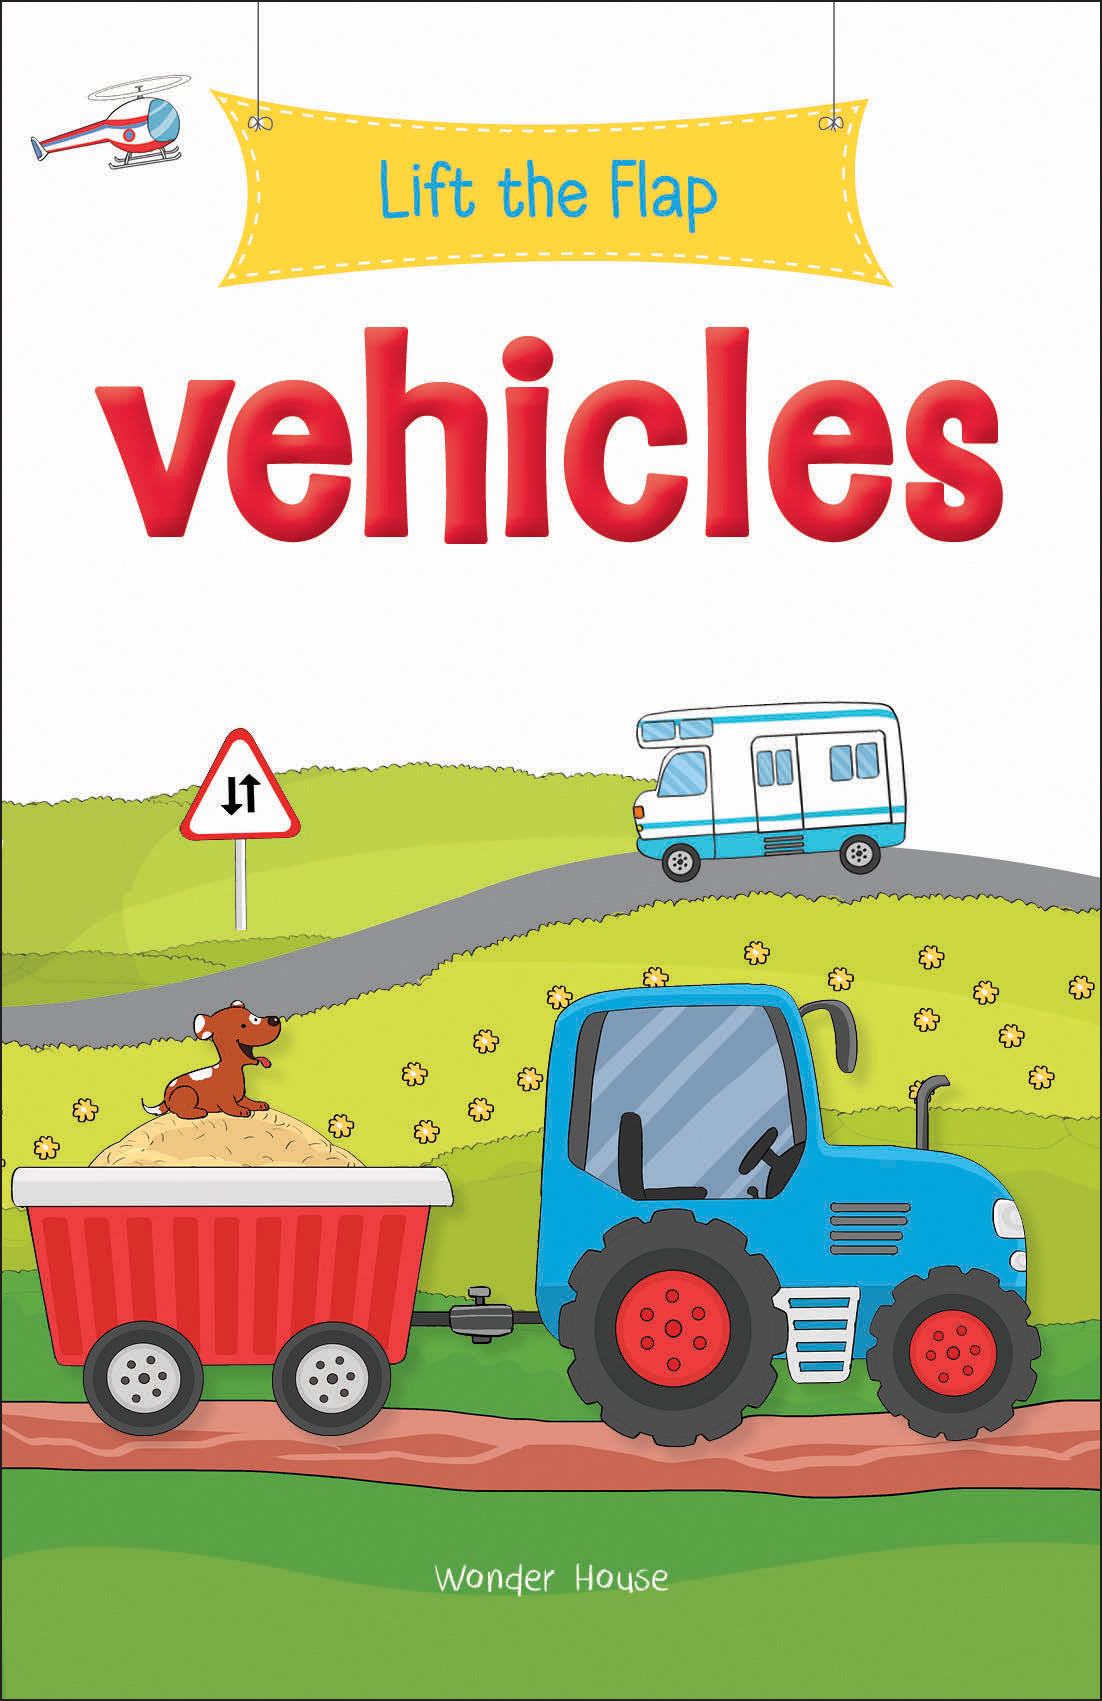 Lift the Flap - Vehicles : Early Learning Novelty Board Book For Children